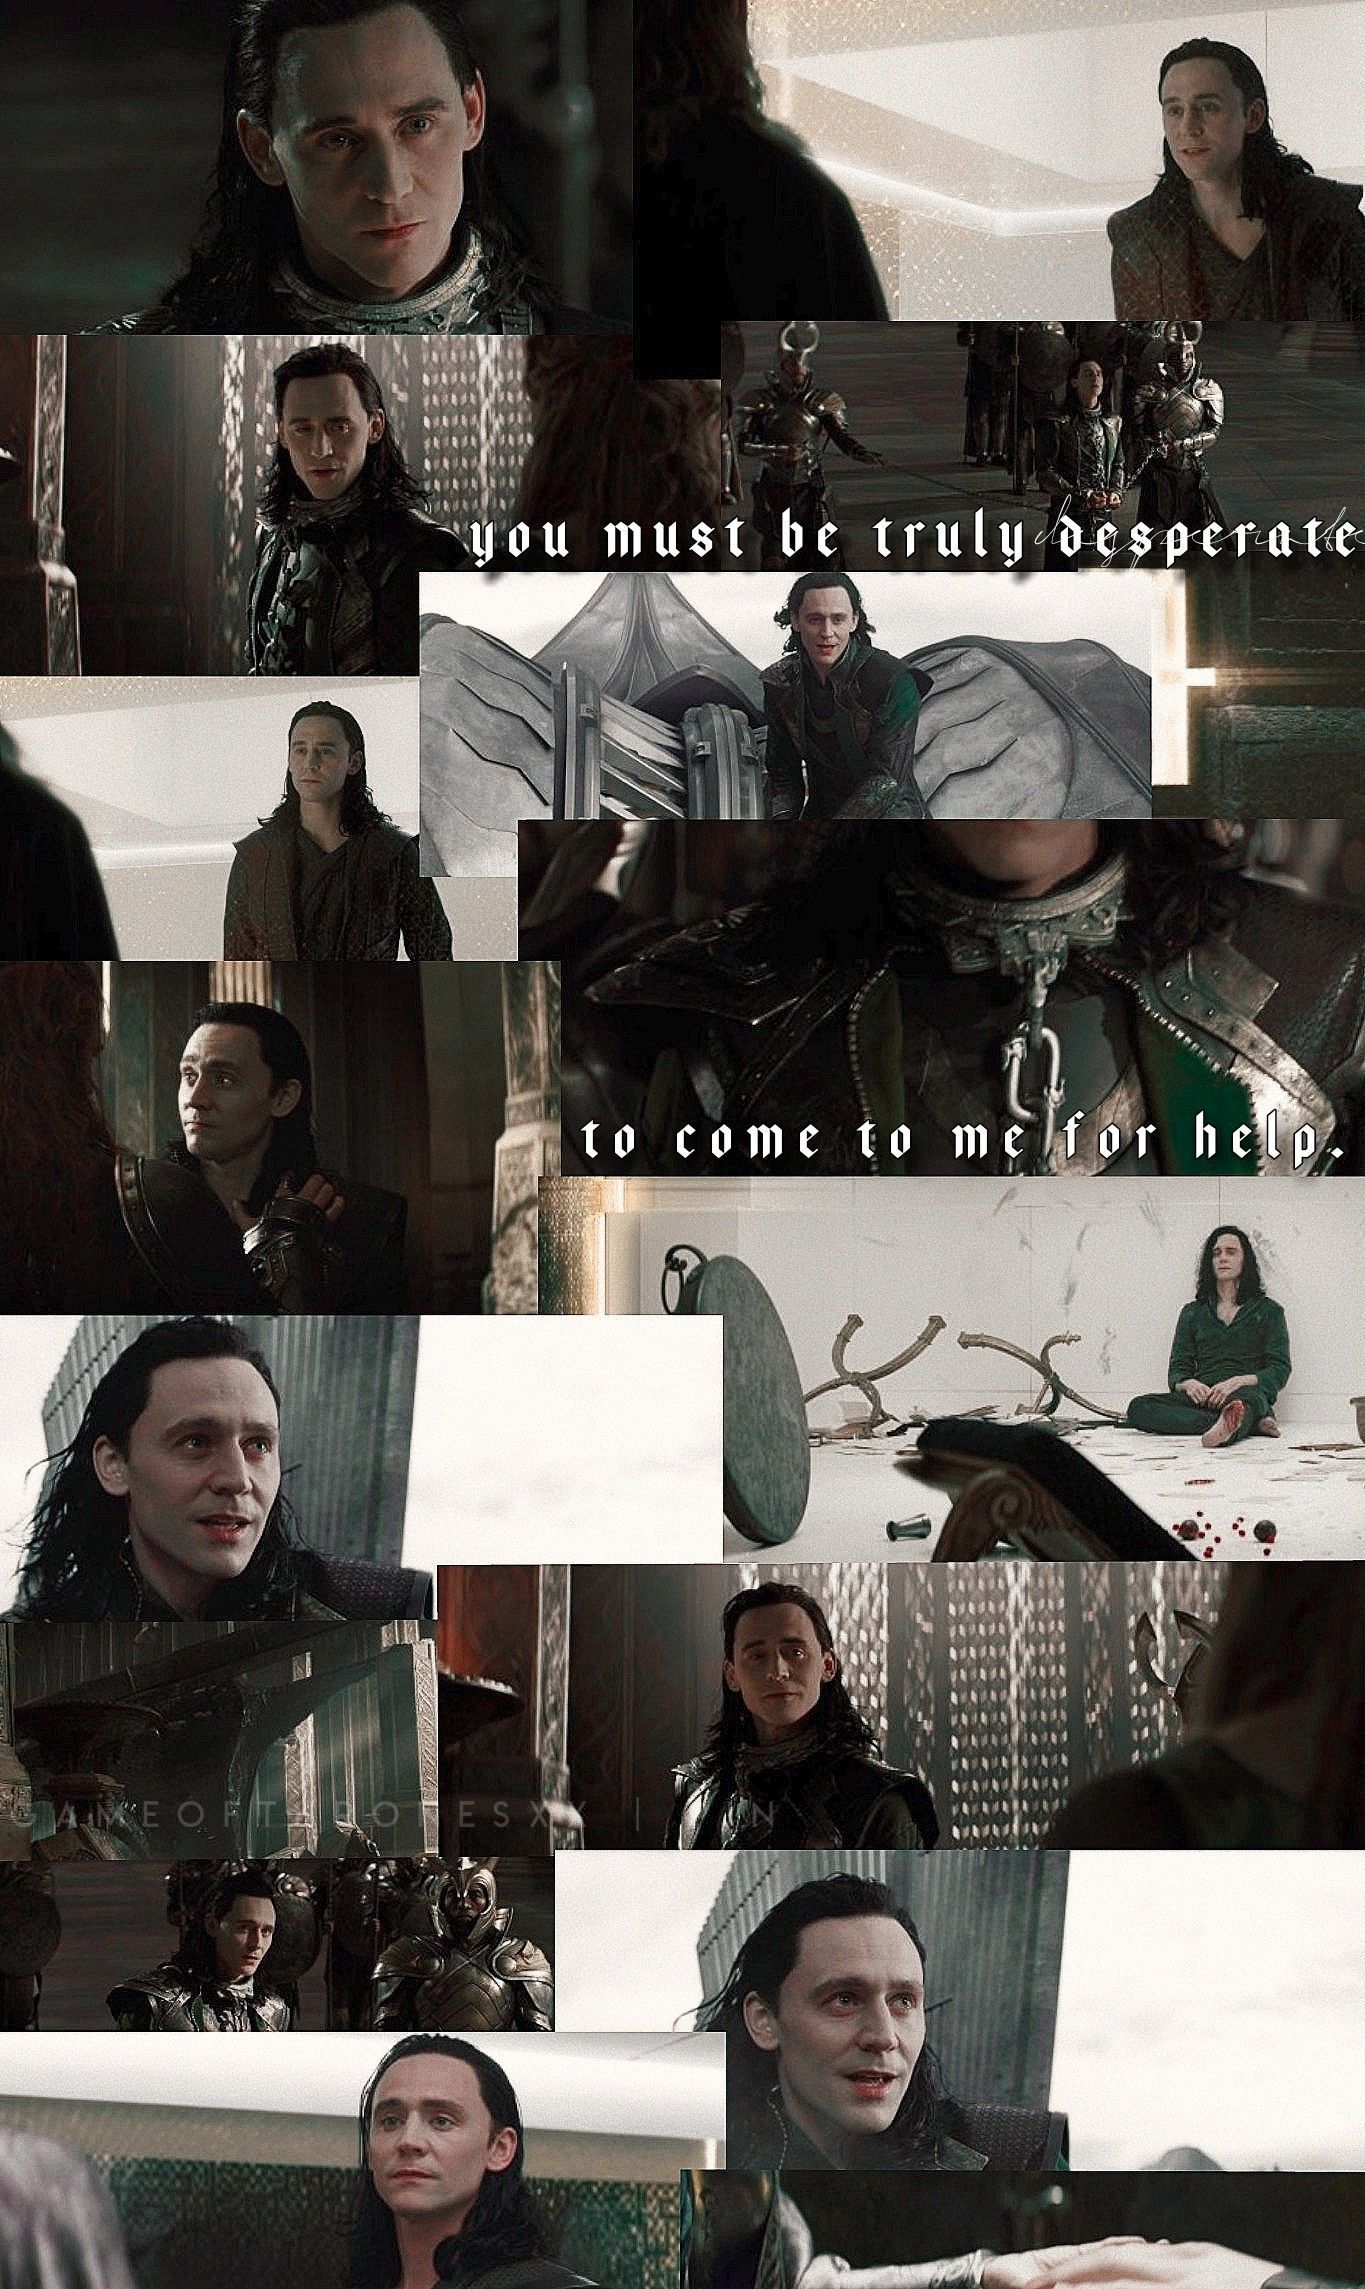 A collage of pictures with text - Loki